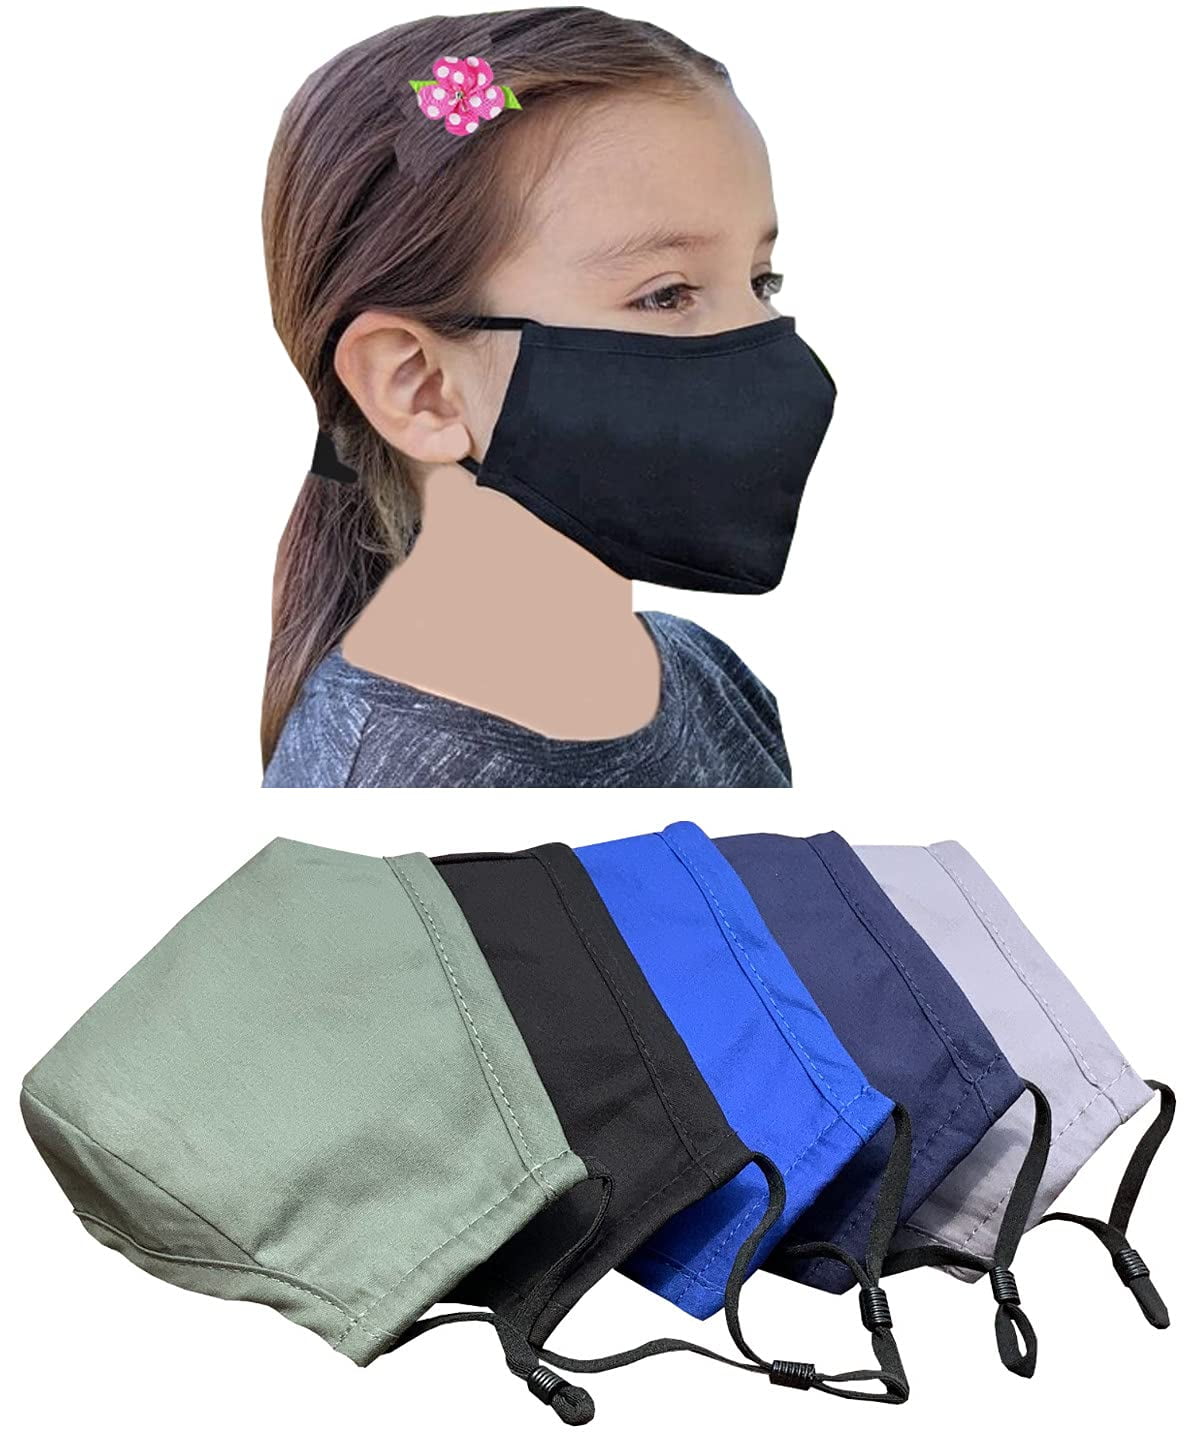 Reusable Breathable Face Covering Universal Floral pattern Stretchy Filter cloth One Piece Multifunctional Half Face Bandana